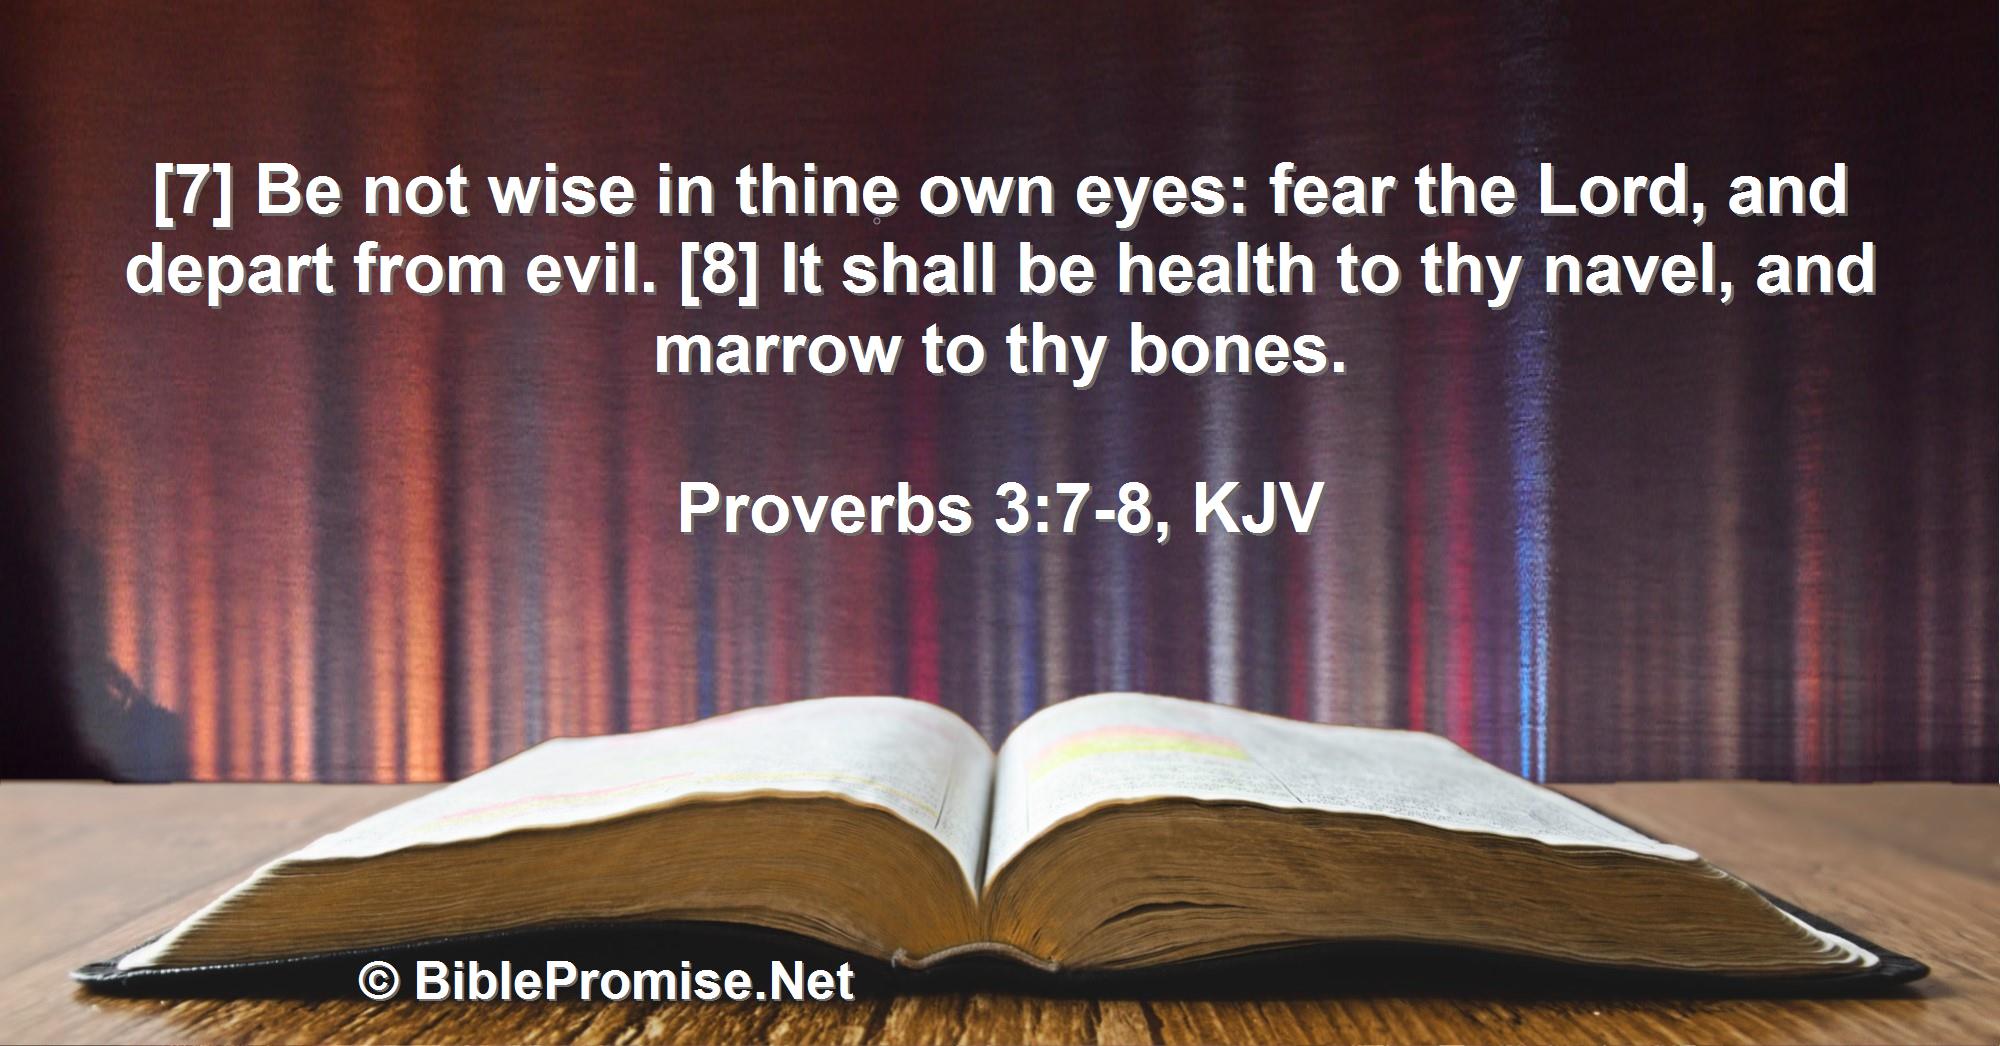 Tuesday, May 30, 2023 - Proverbs 3:7-8 (KJV) - Bible promise that God will heal you.